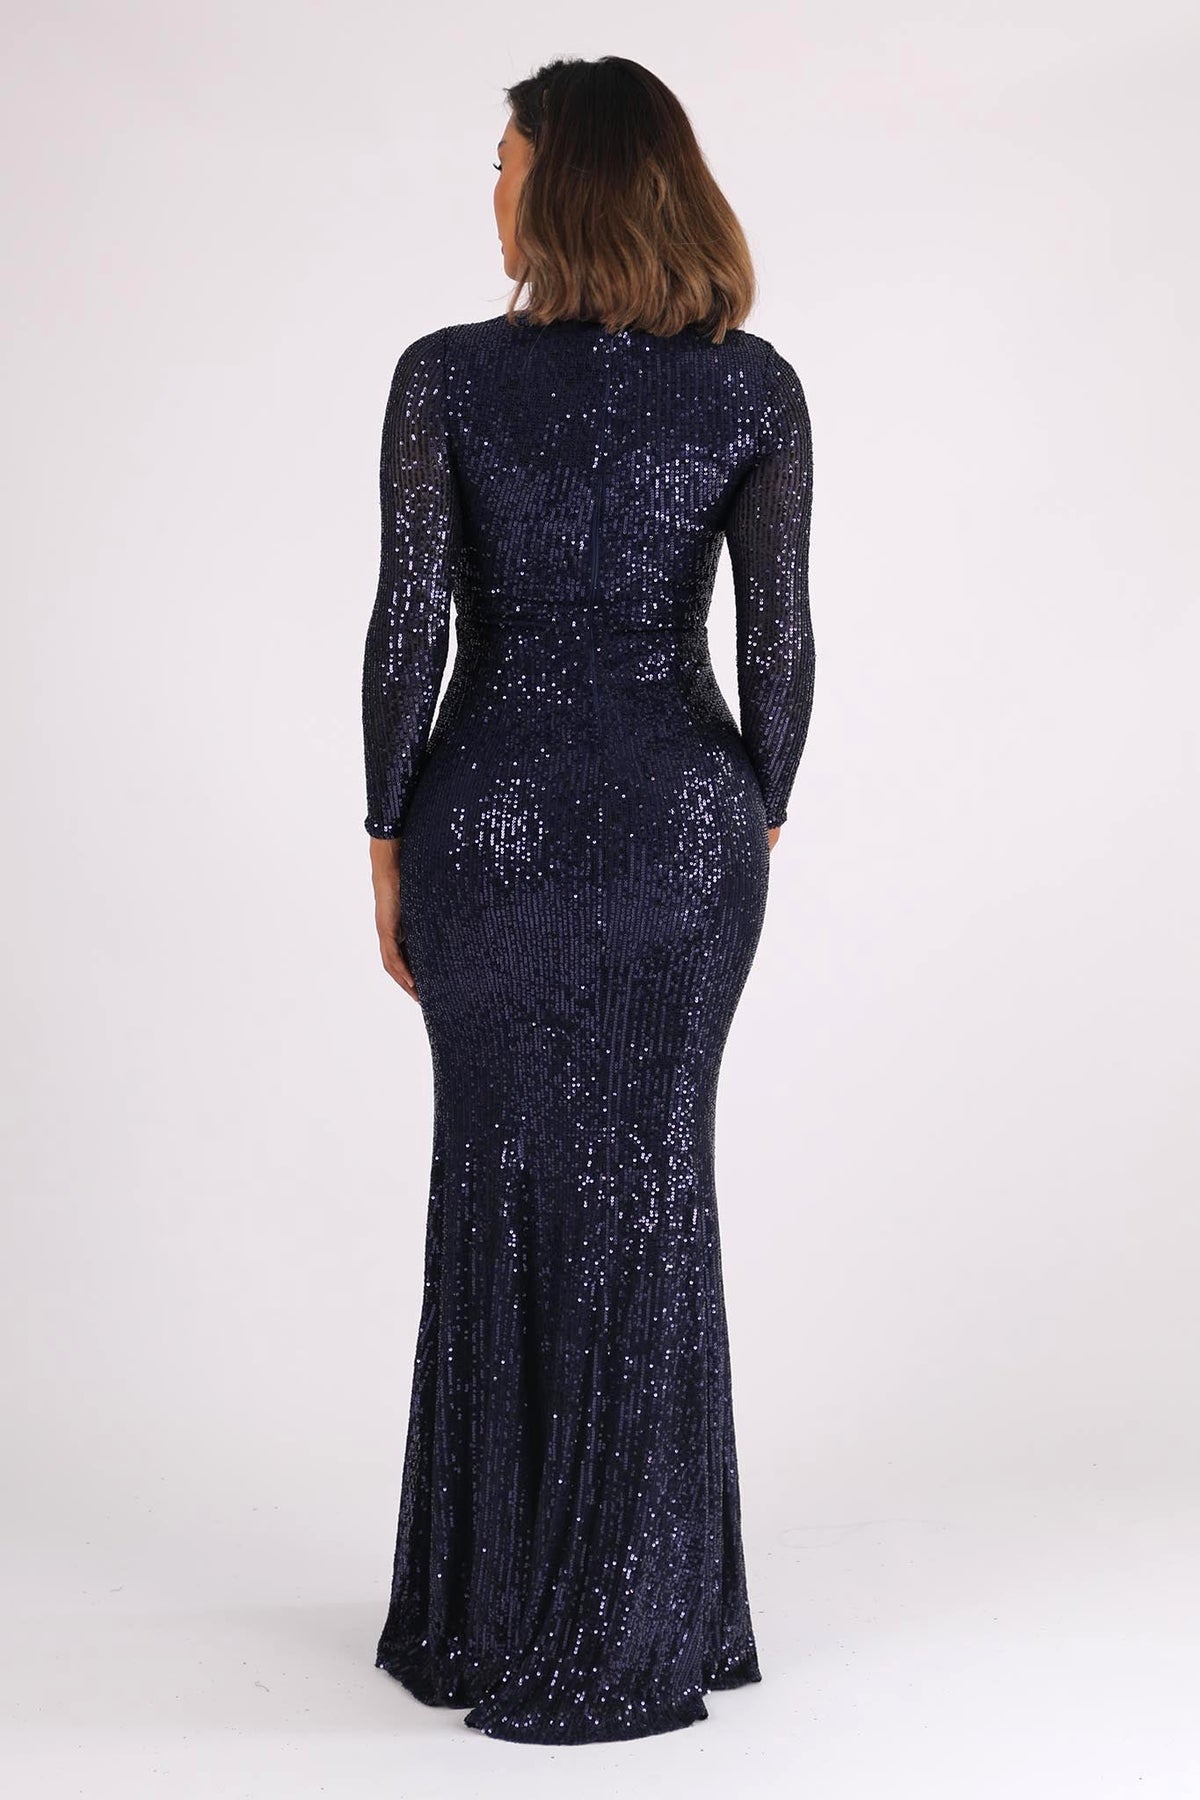 Back Image of  Navy Sequin Long Sleeve Fitted Evening Maxi Dress with V Neckline, Column Silhouette and Side Split